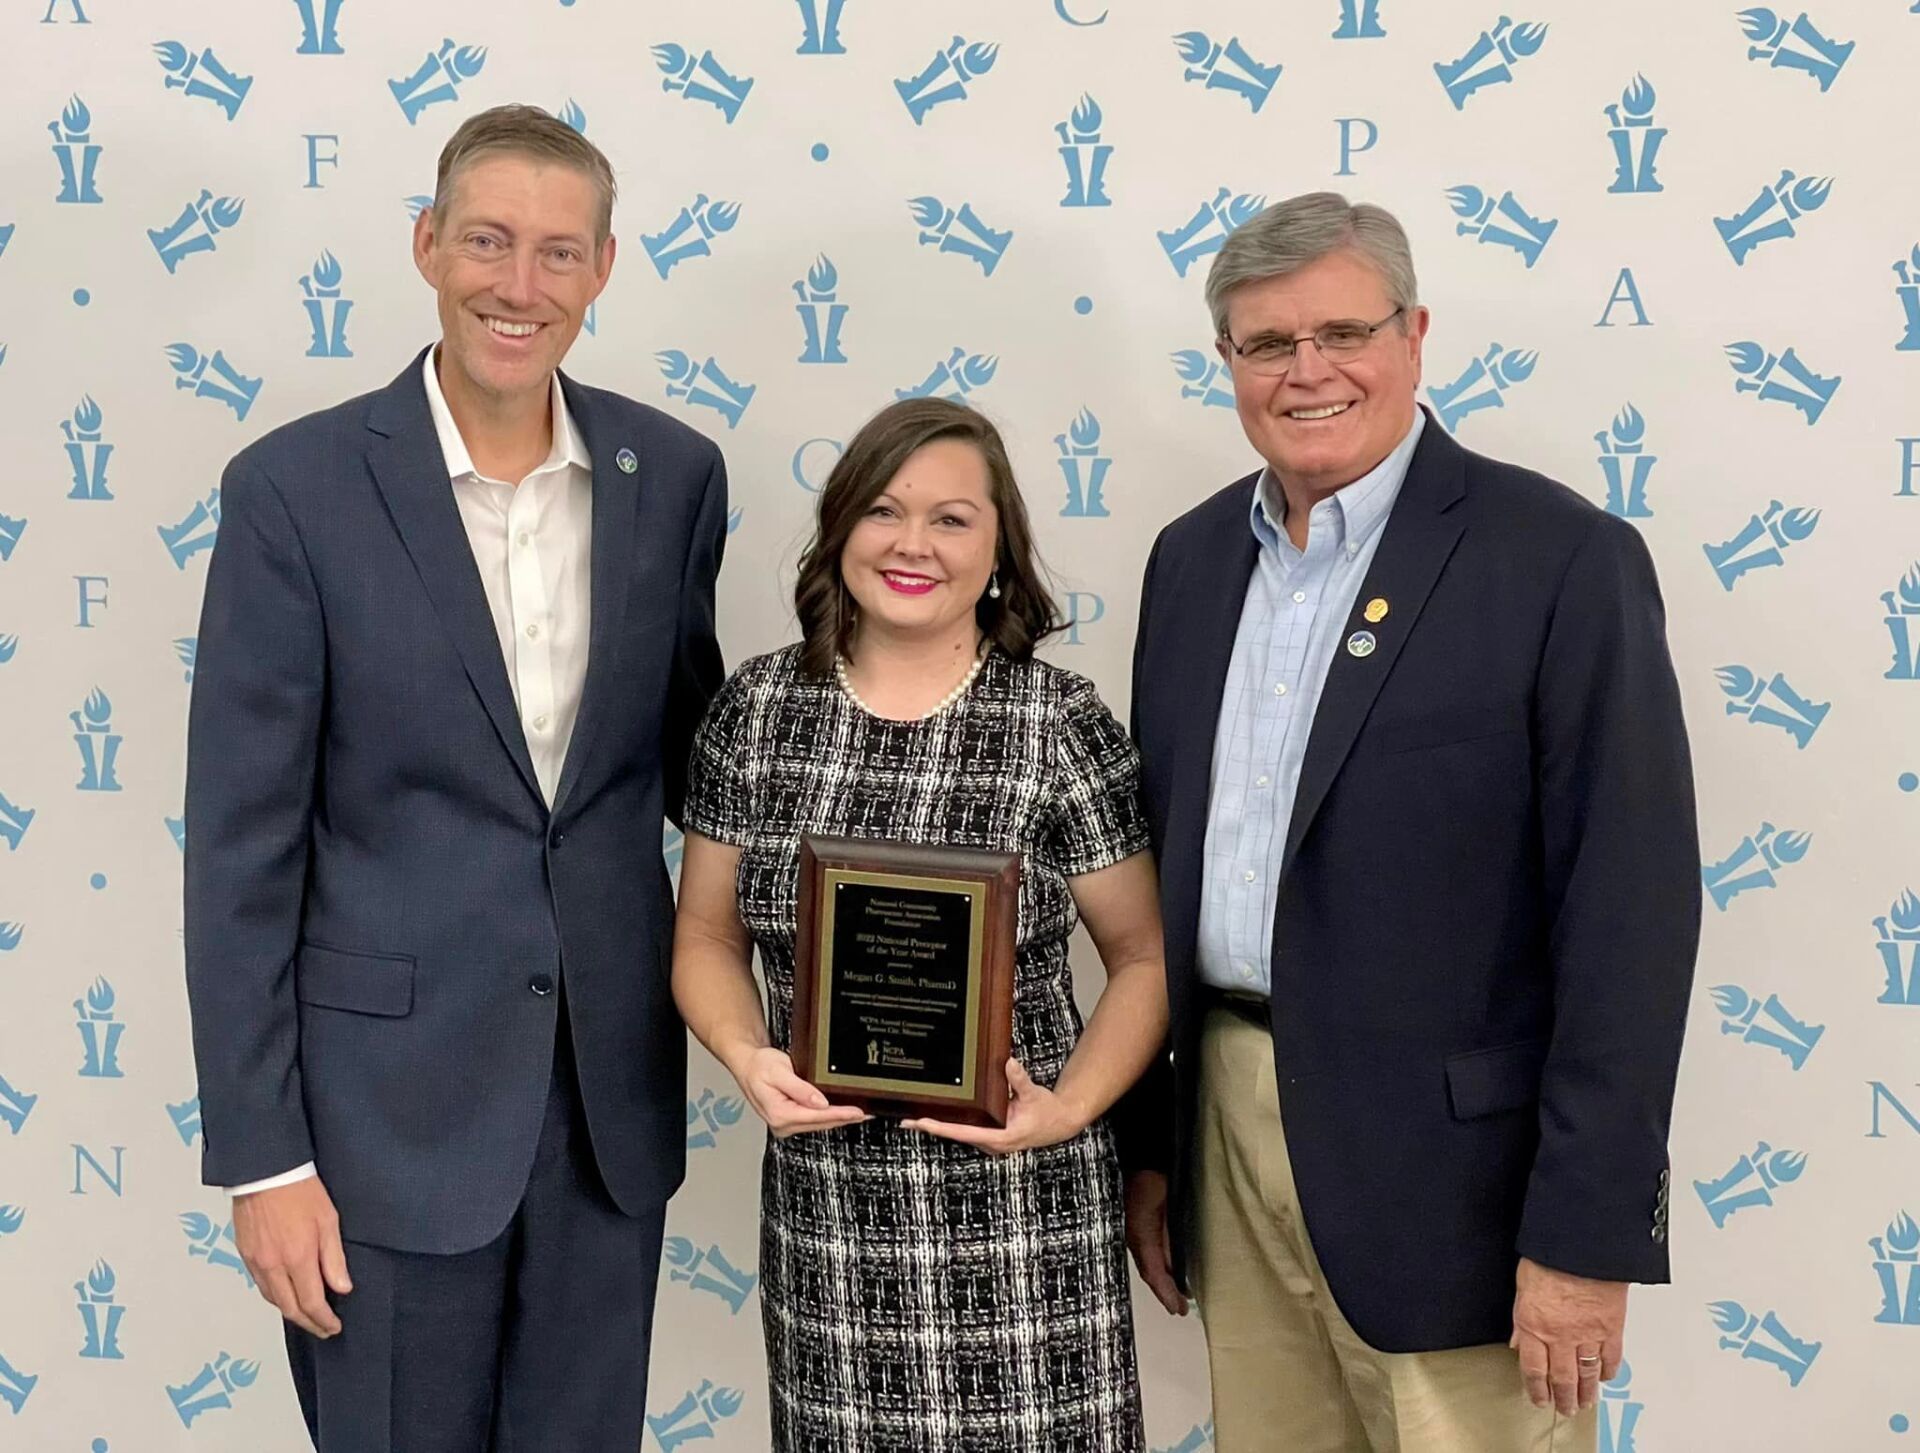 Megan G. Smith Awarded 2022 National Preceptor of the Year Award by NCPA Foundation